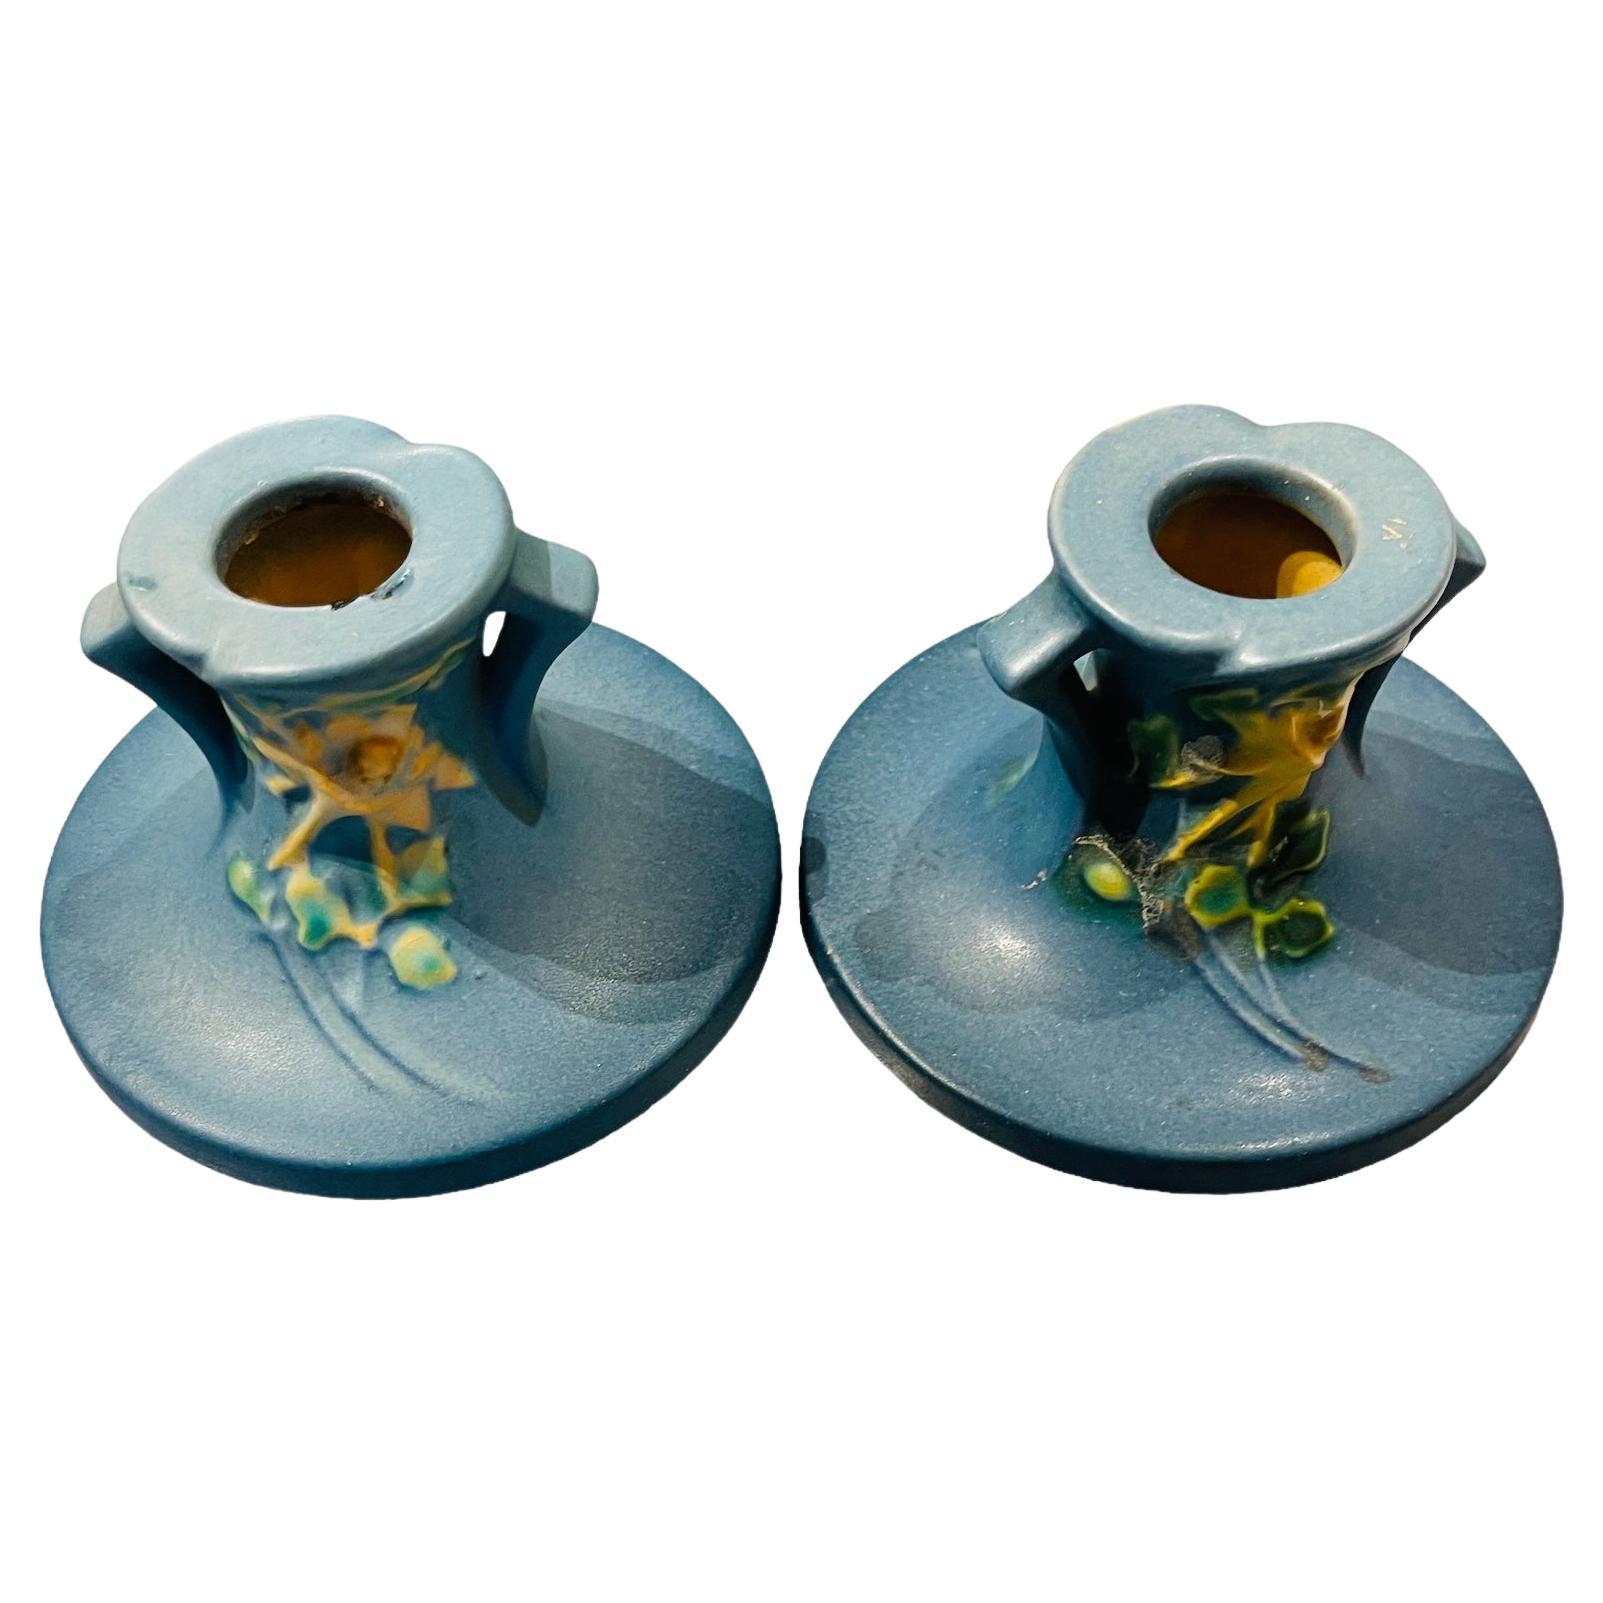 This is a Roseville Art Pottery Columbine pattern pair of candleholders. They are blue and adorned with a branch of yellow Columbine flowers and green/yellow leaves in the front. Below their base are hallmarked Roseville with the mold number 1145-2